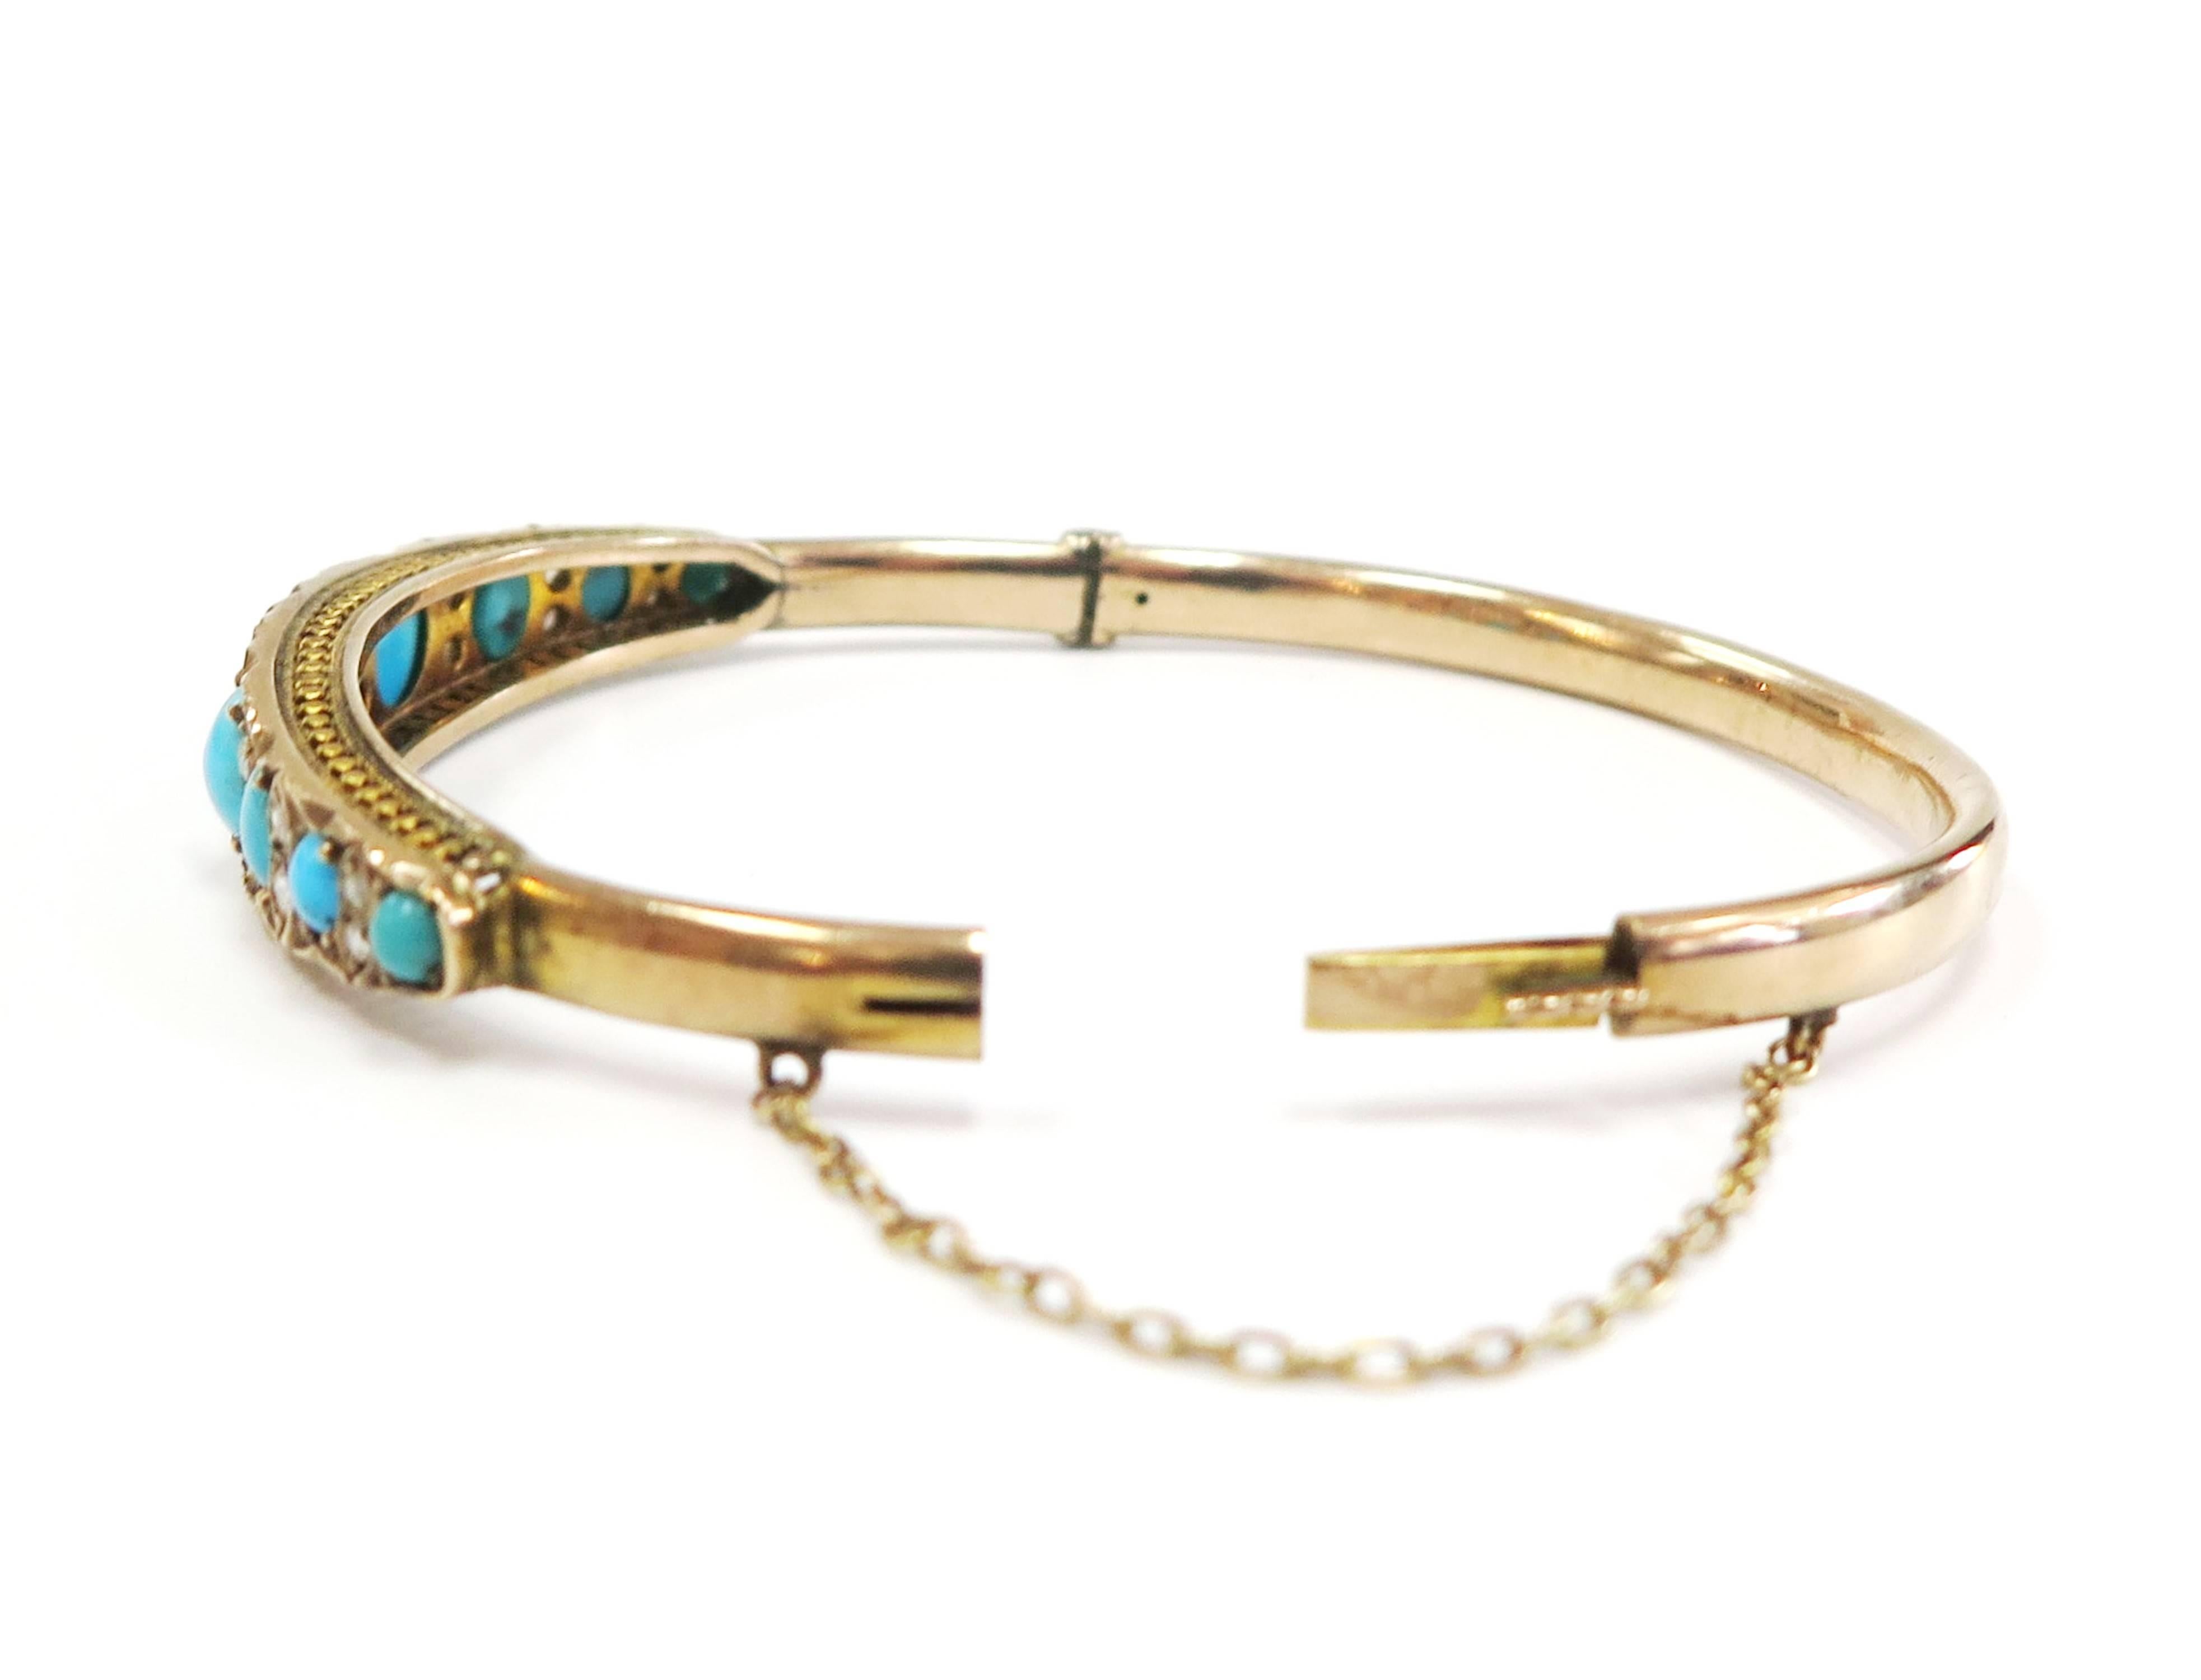 Round Cut Antique Victorian 1800s Bangle with Turquoise, Rose Cut Diamonds, 14 Karat For Sale